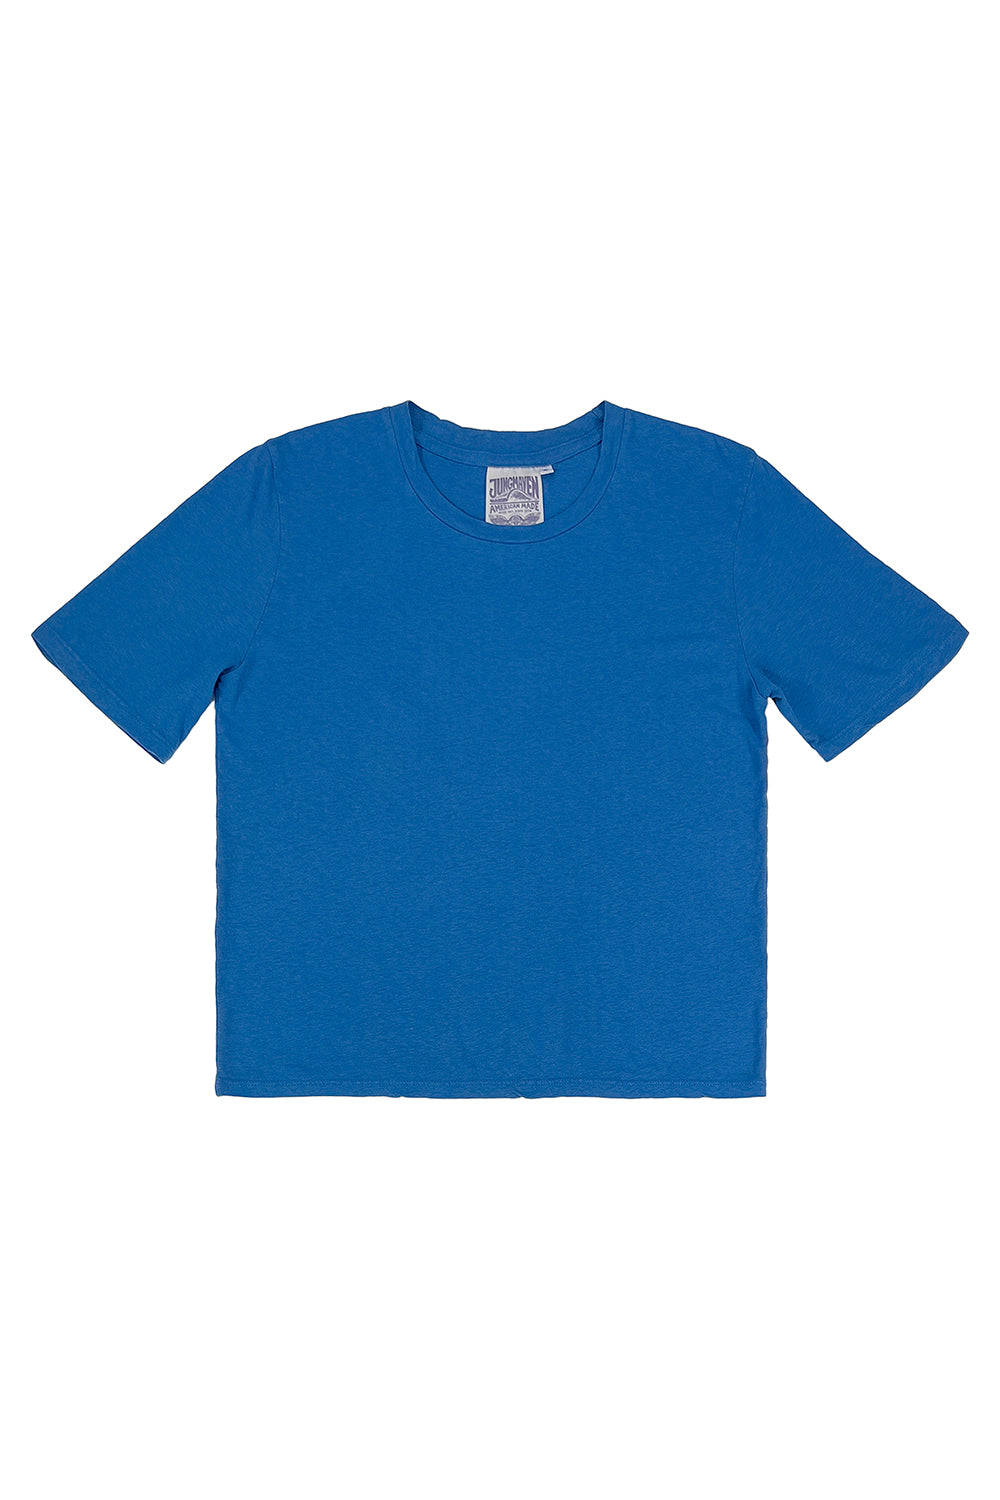 Silverlake Cropped Tee | Jungmaven Hemp Clothing & Accessories / Color: Galaxy Blue